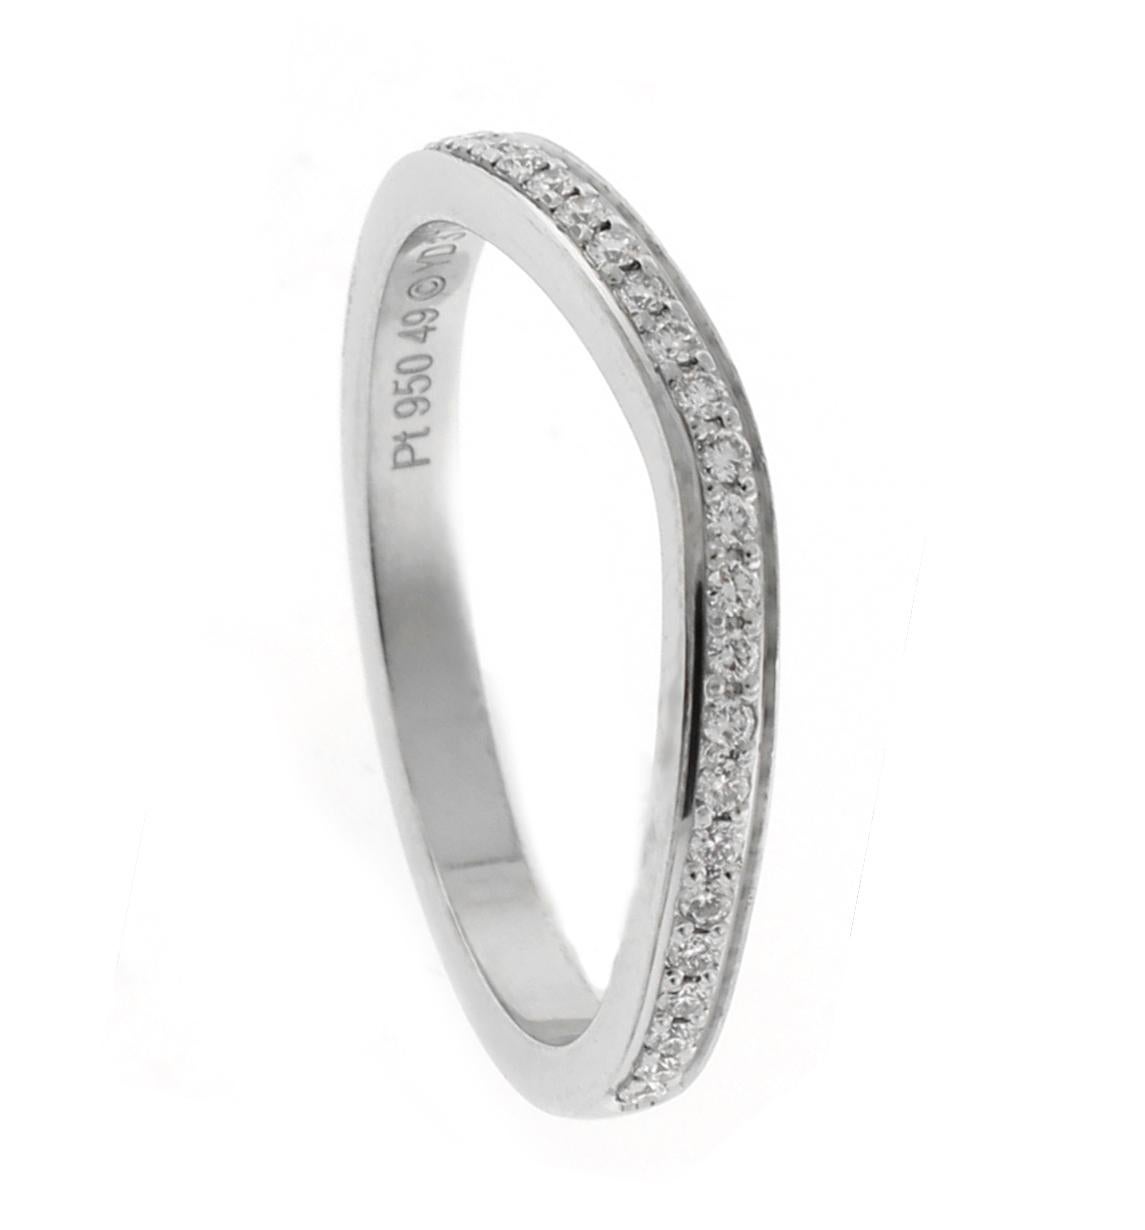 Cartier d'Amour Platinum Wedding Band In Excellent Condition For Sale In Bethesda, MD